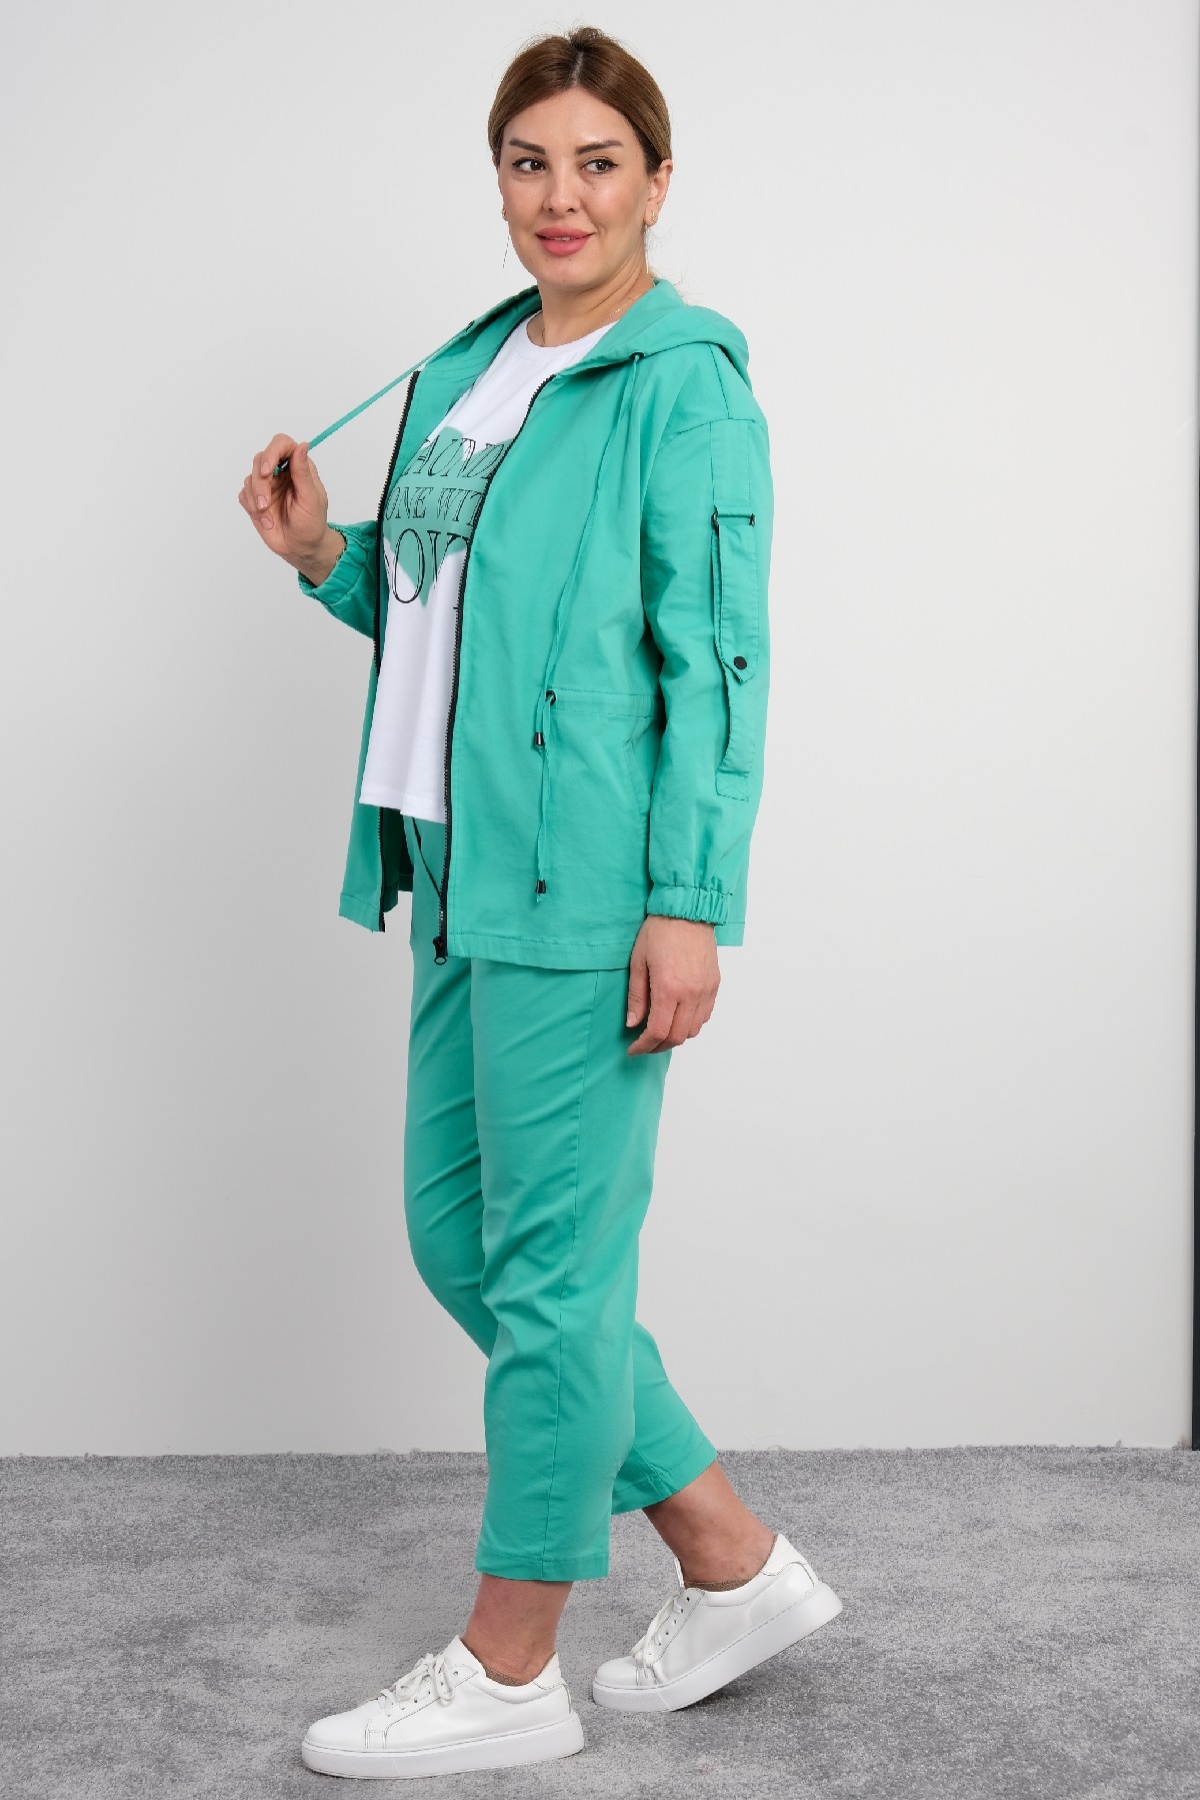 Women's 3 Piece Suits-Turquoise